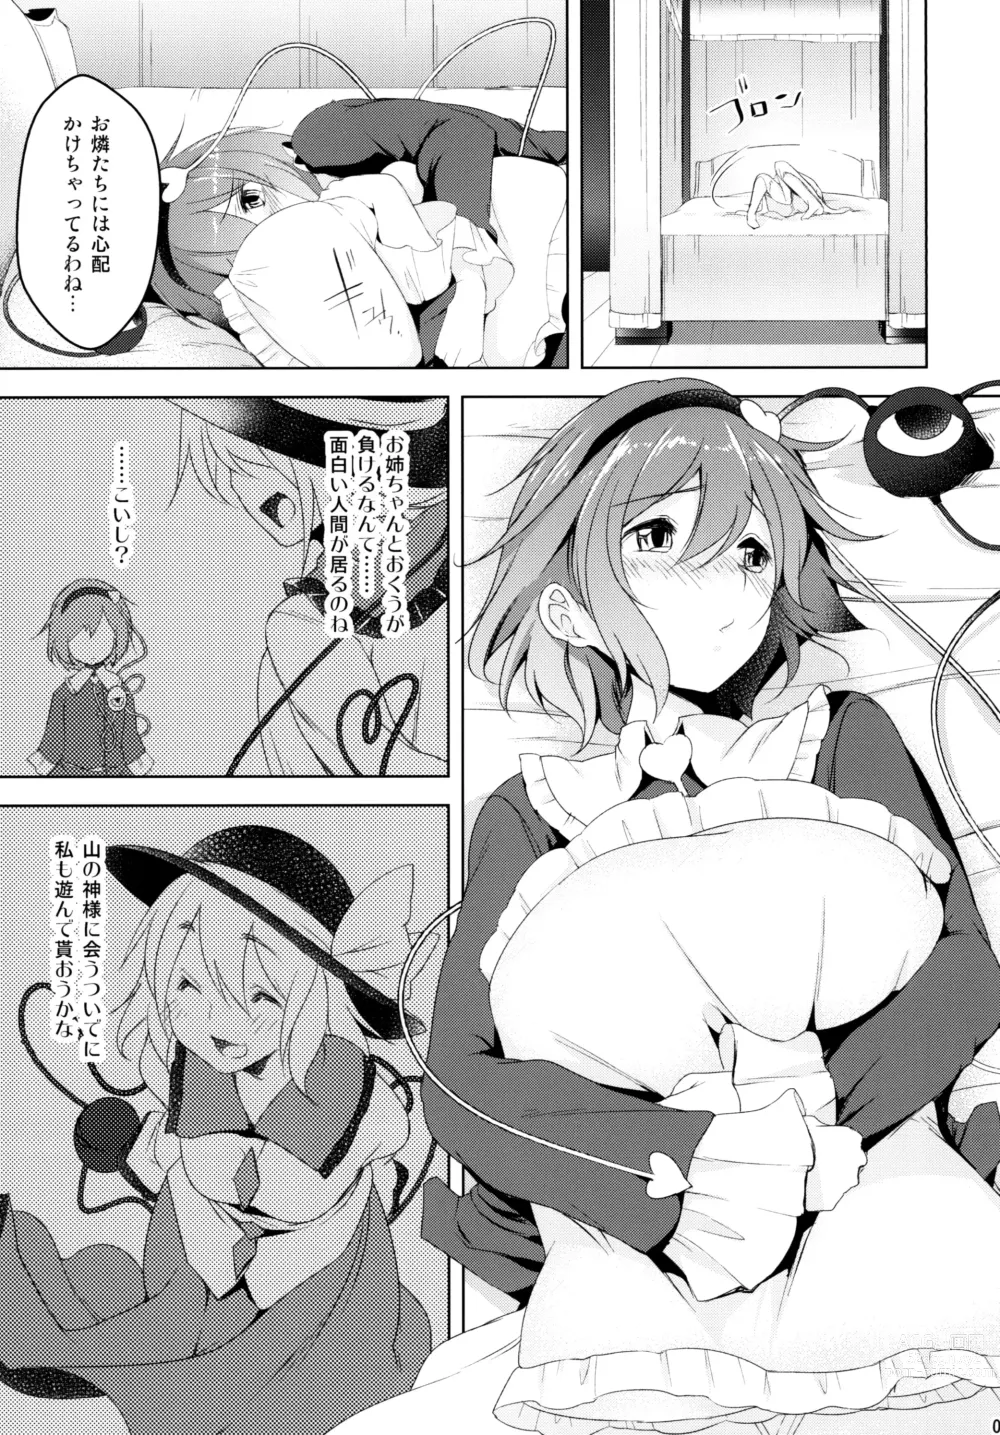 Page 5 of doujinshi Incest